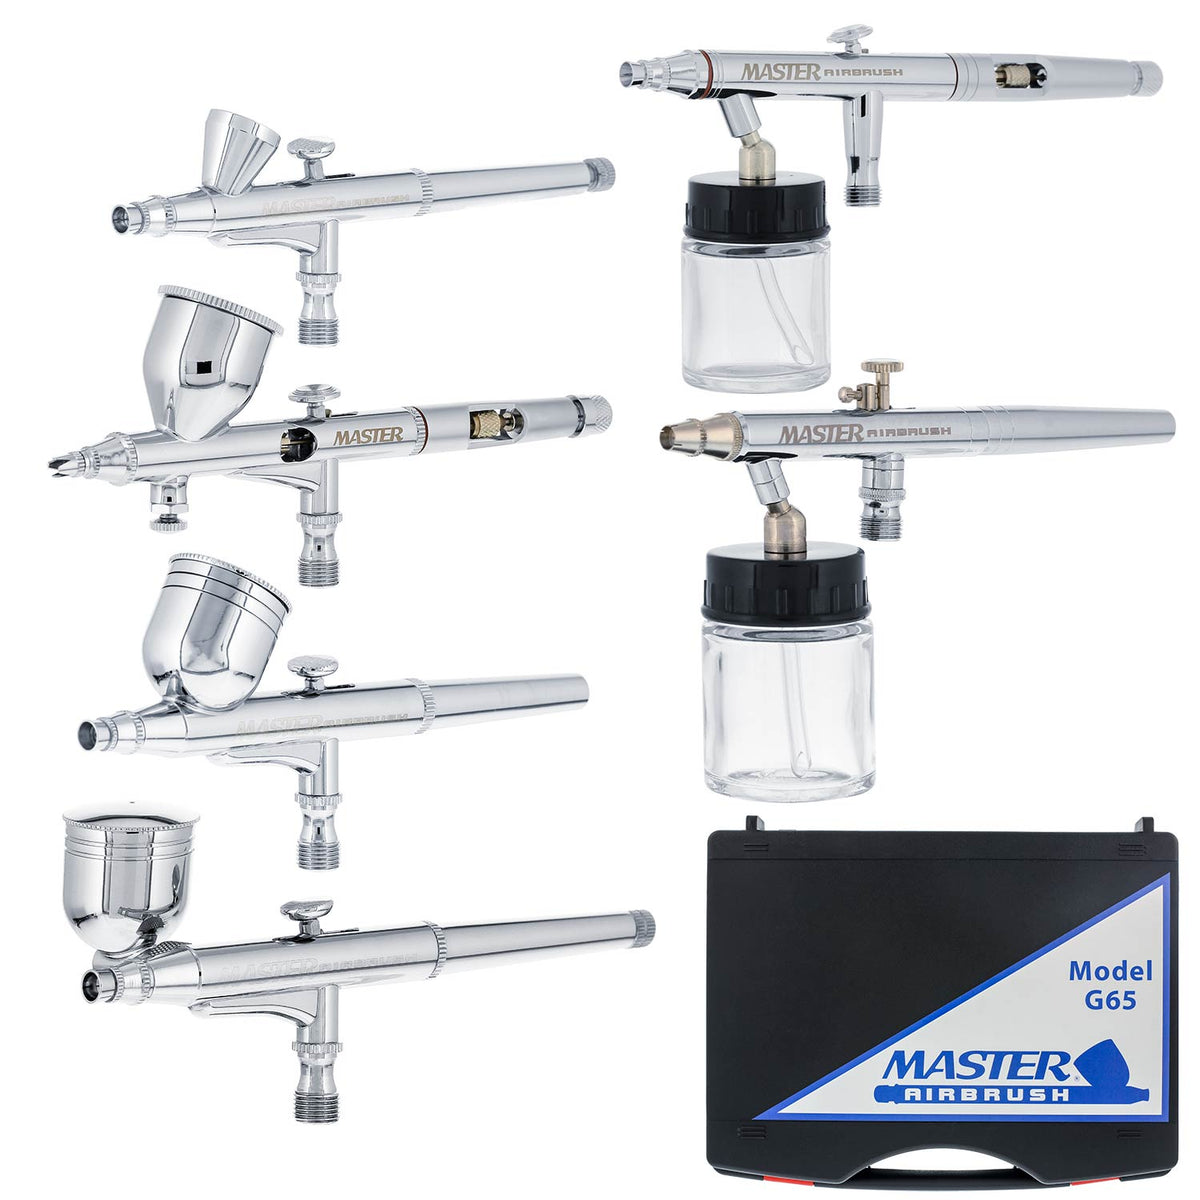 Master G64 Studio Airbrush Set with 6 Airbrushes - 2 Gravity Feed, 3 Siphon  Feed, 1 Side Feed, Airbrush Set - Fred Meyer